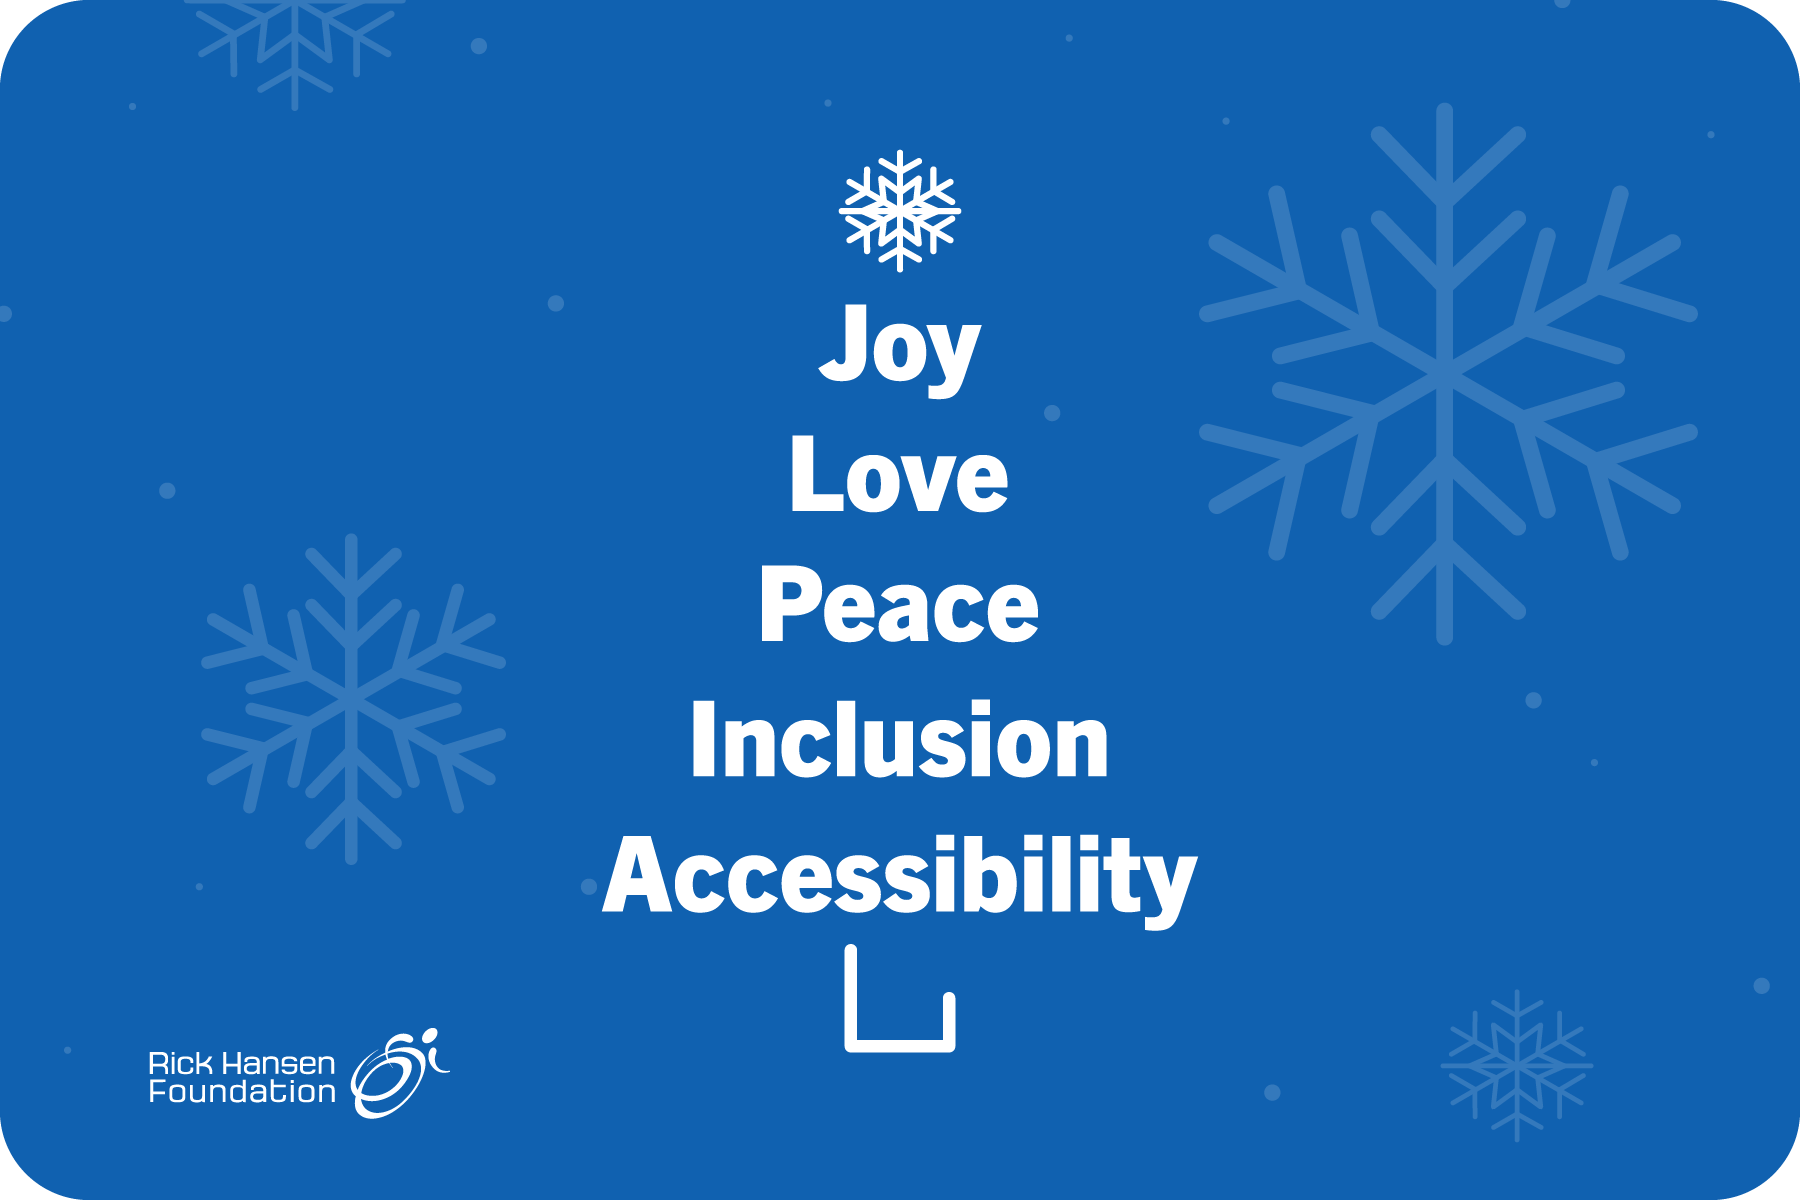 Blue background with large transparent snowflakes. In the centre, there is white text that is stacked on top of each other to make the shape of a Christmas tree with a snowflake on top. The text reads (from top to bottom) joy, love, peace, inclusion, accessibility. The Rick Hansen Foundation logo is in the bottom left corner.